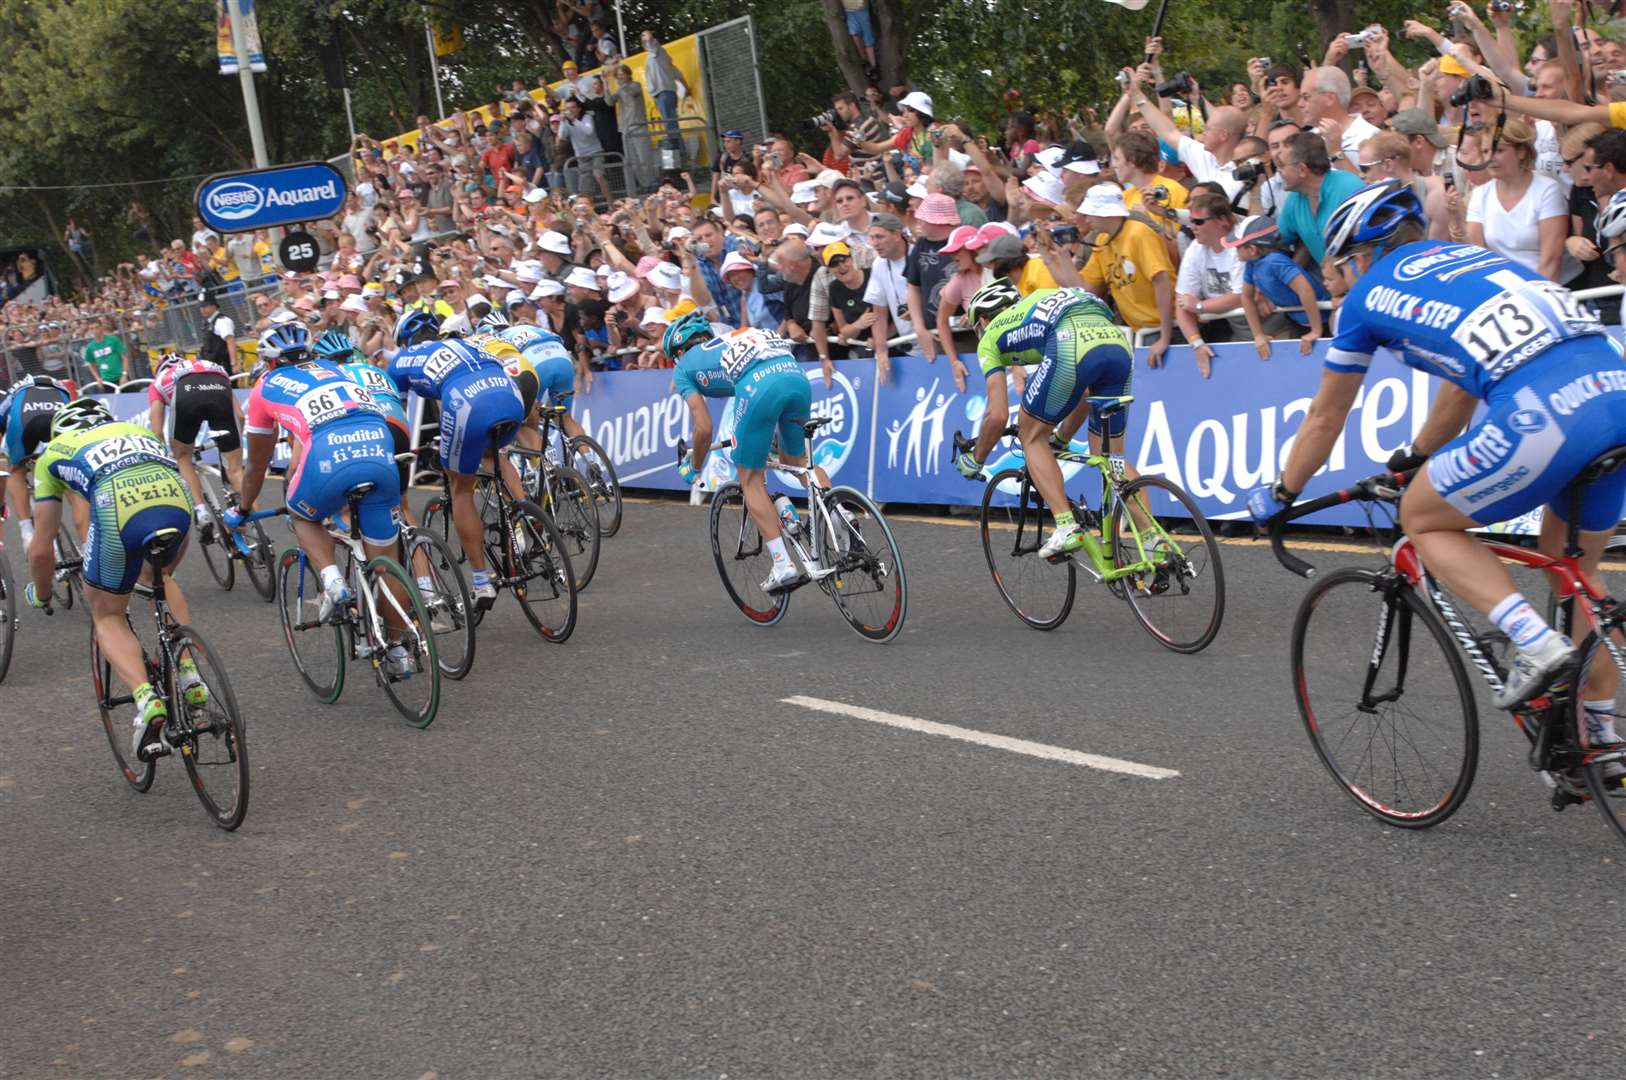 Thousands took to the street to watch the cyclists race for glory. Picture: Barry Goodwin